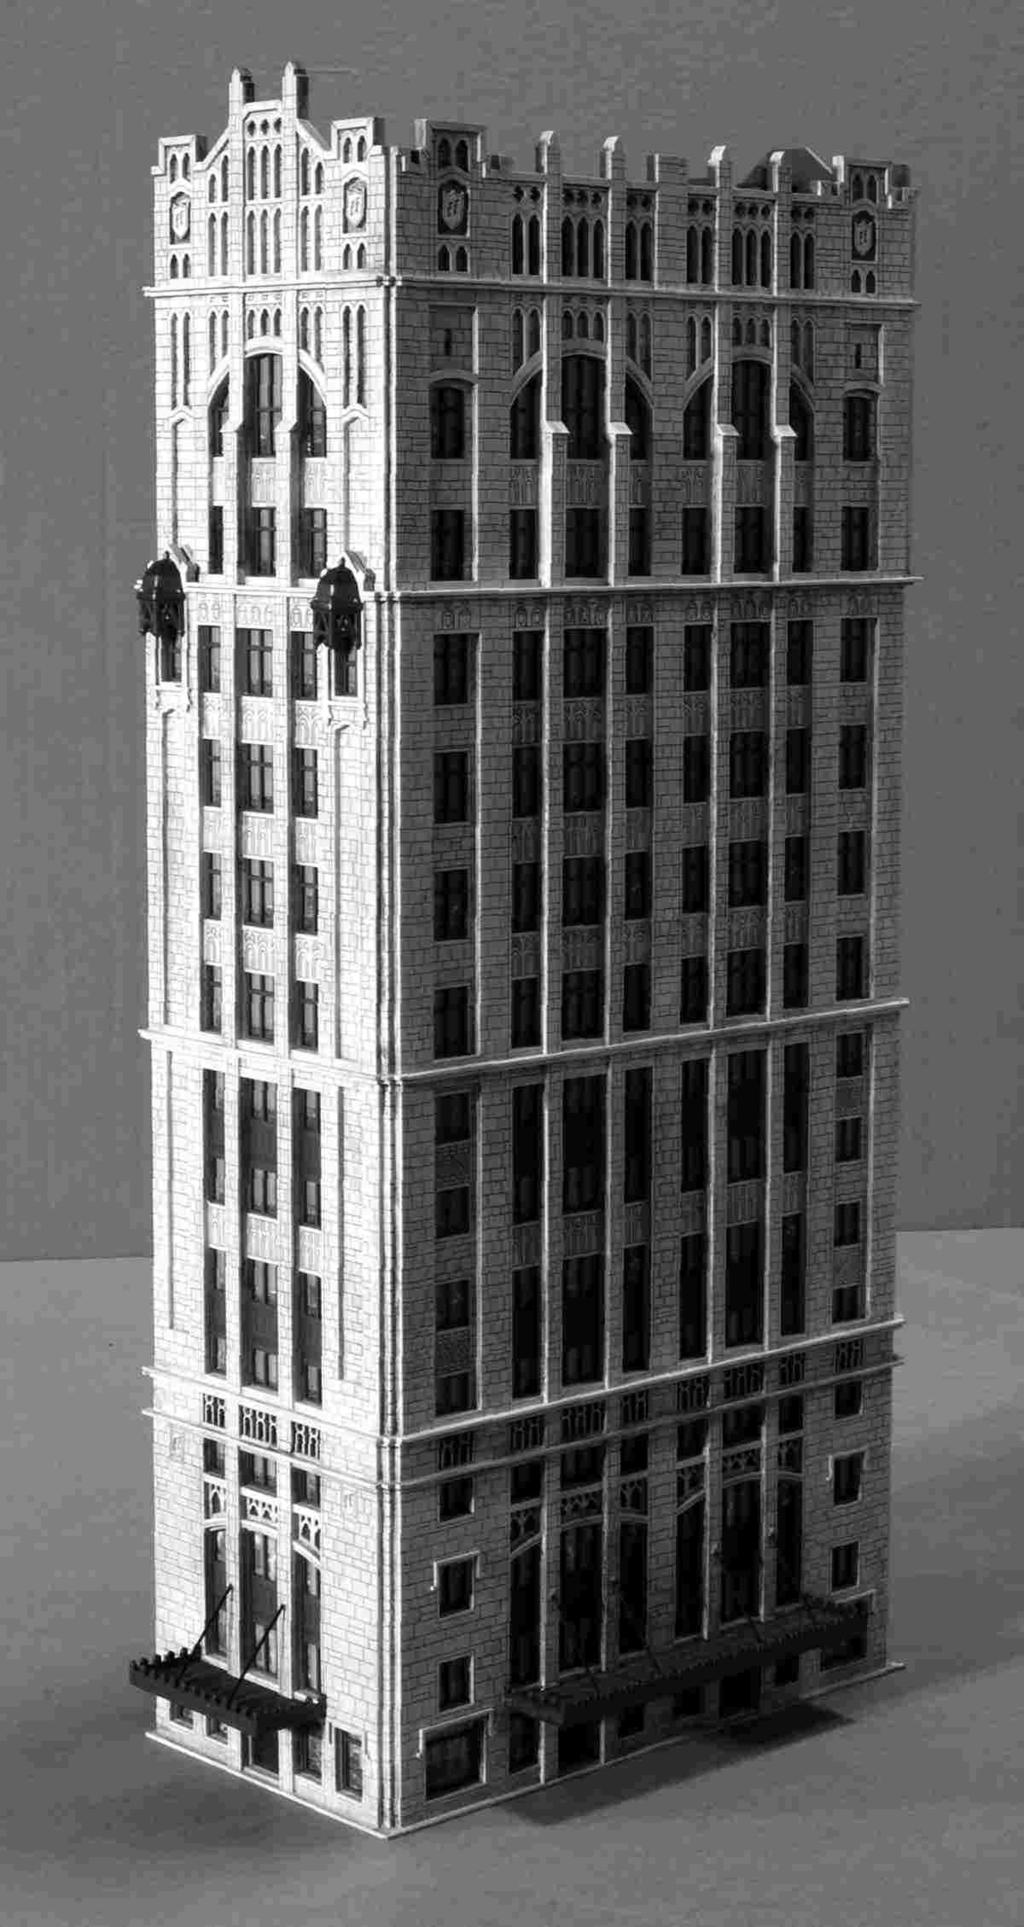 About the Kit The building is based on a Detroit skyscraper that was completed in1919 in the Gothic Revival architectural style. It has 14 floors.